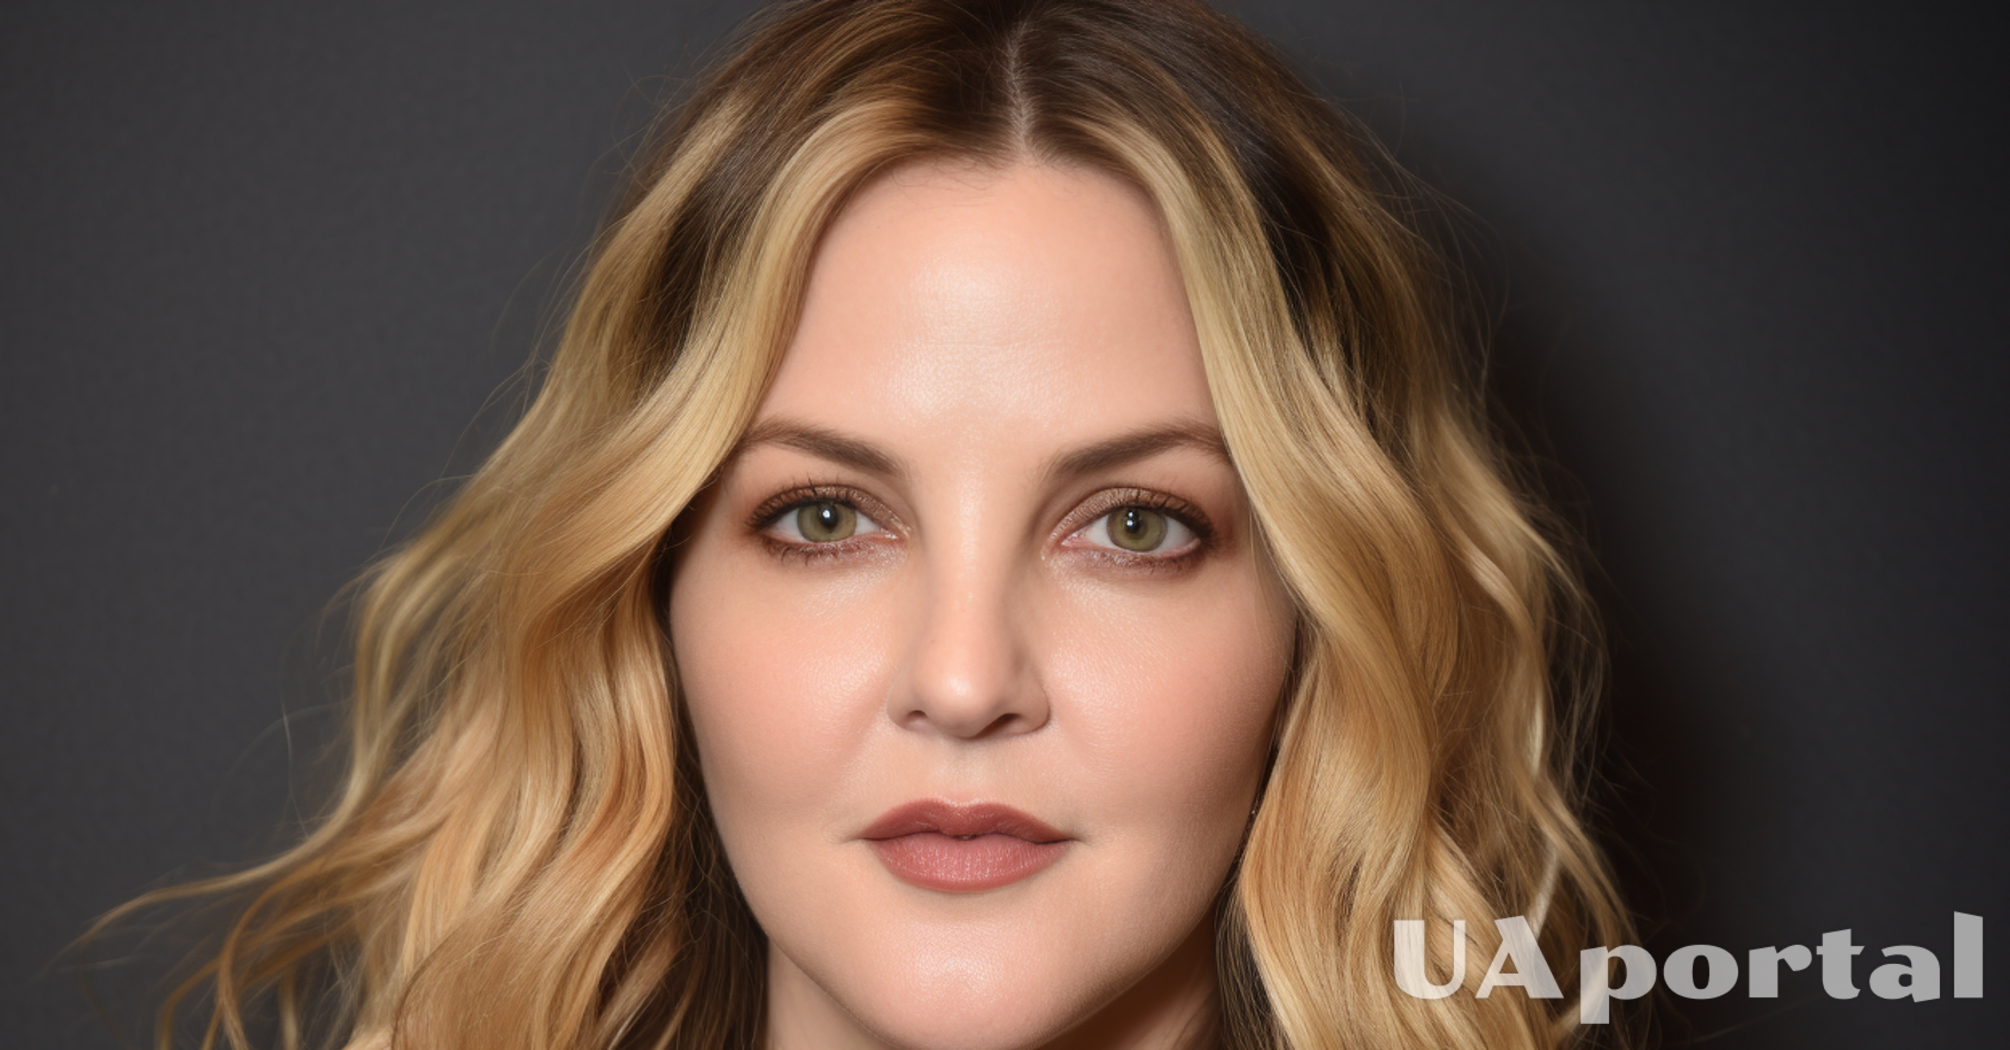 How Drew Barrymore became an audience favorite: the actress's starry path to success